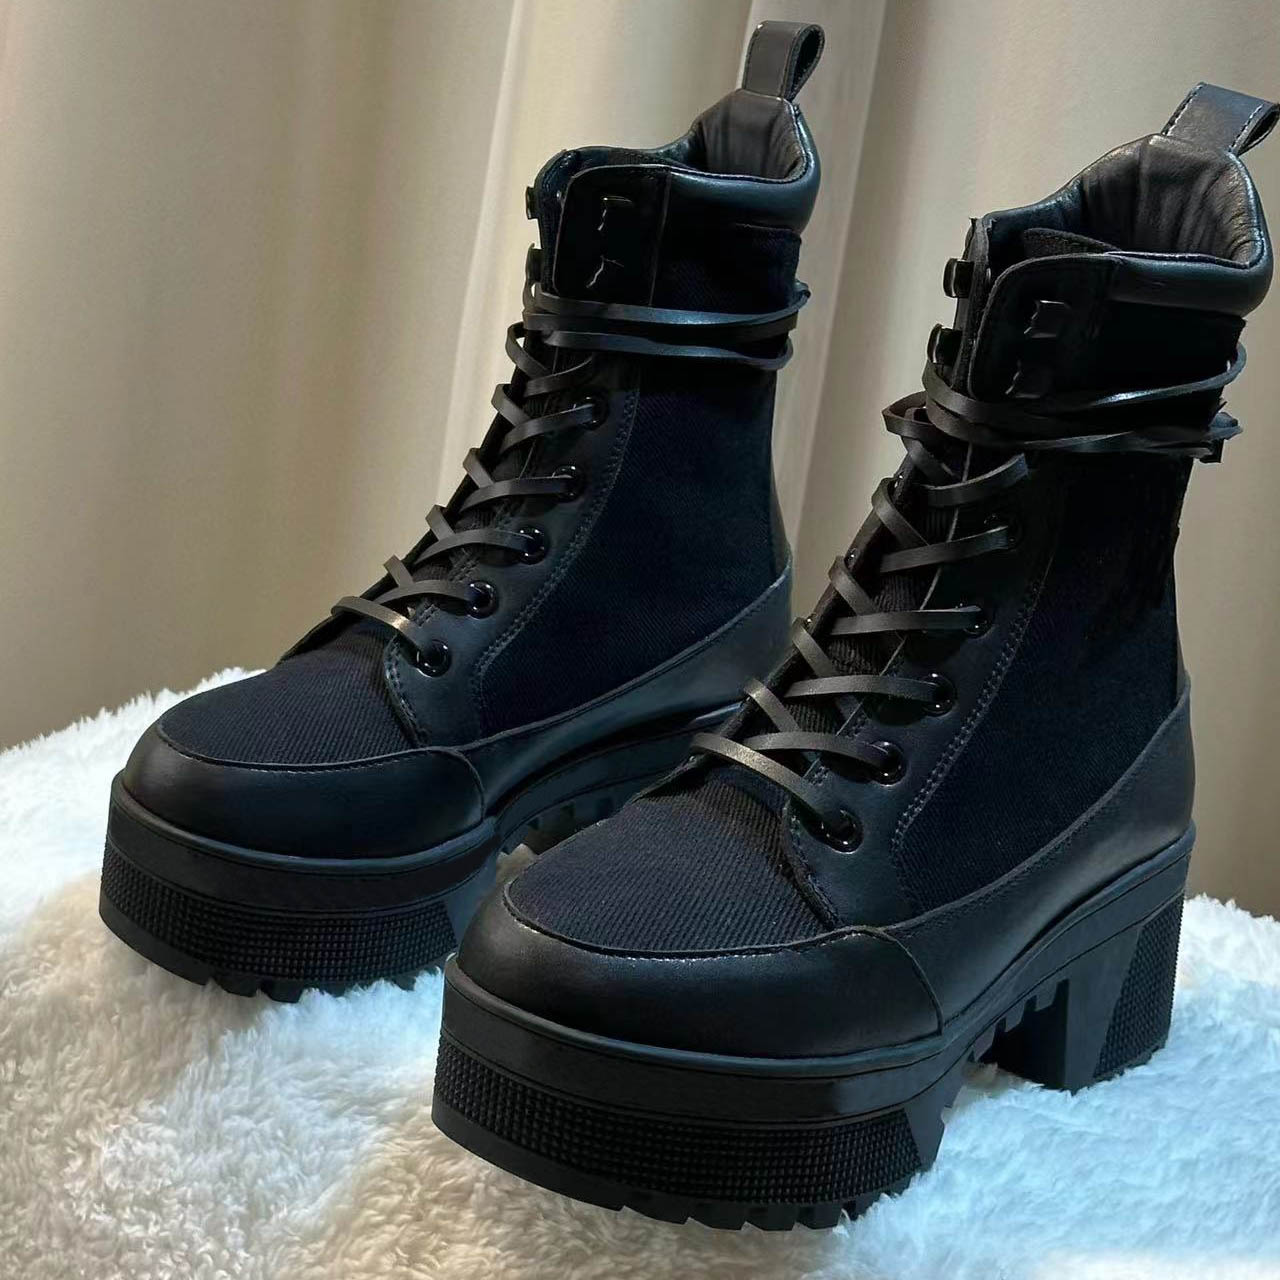 women designer boots sneakers silhouette ankle martin booties stretch high heel sneaker winter womens shoes  motorcycle riding